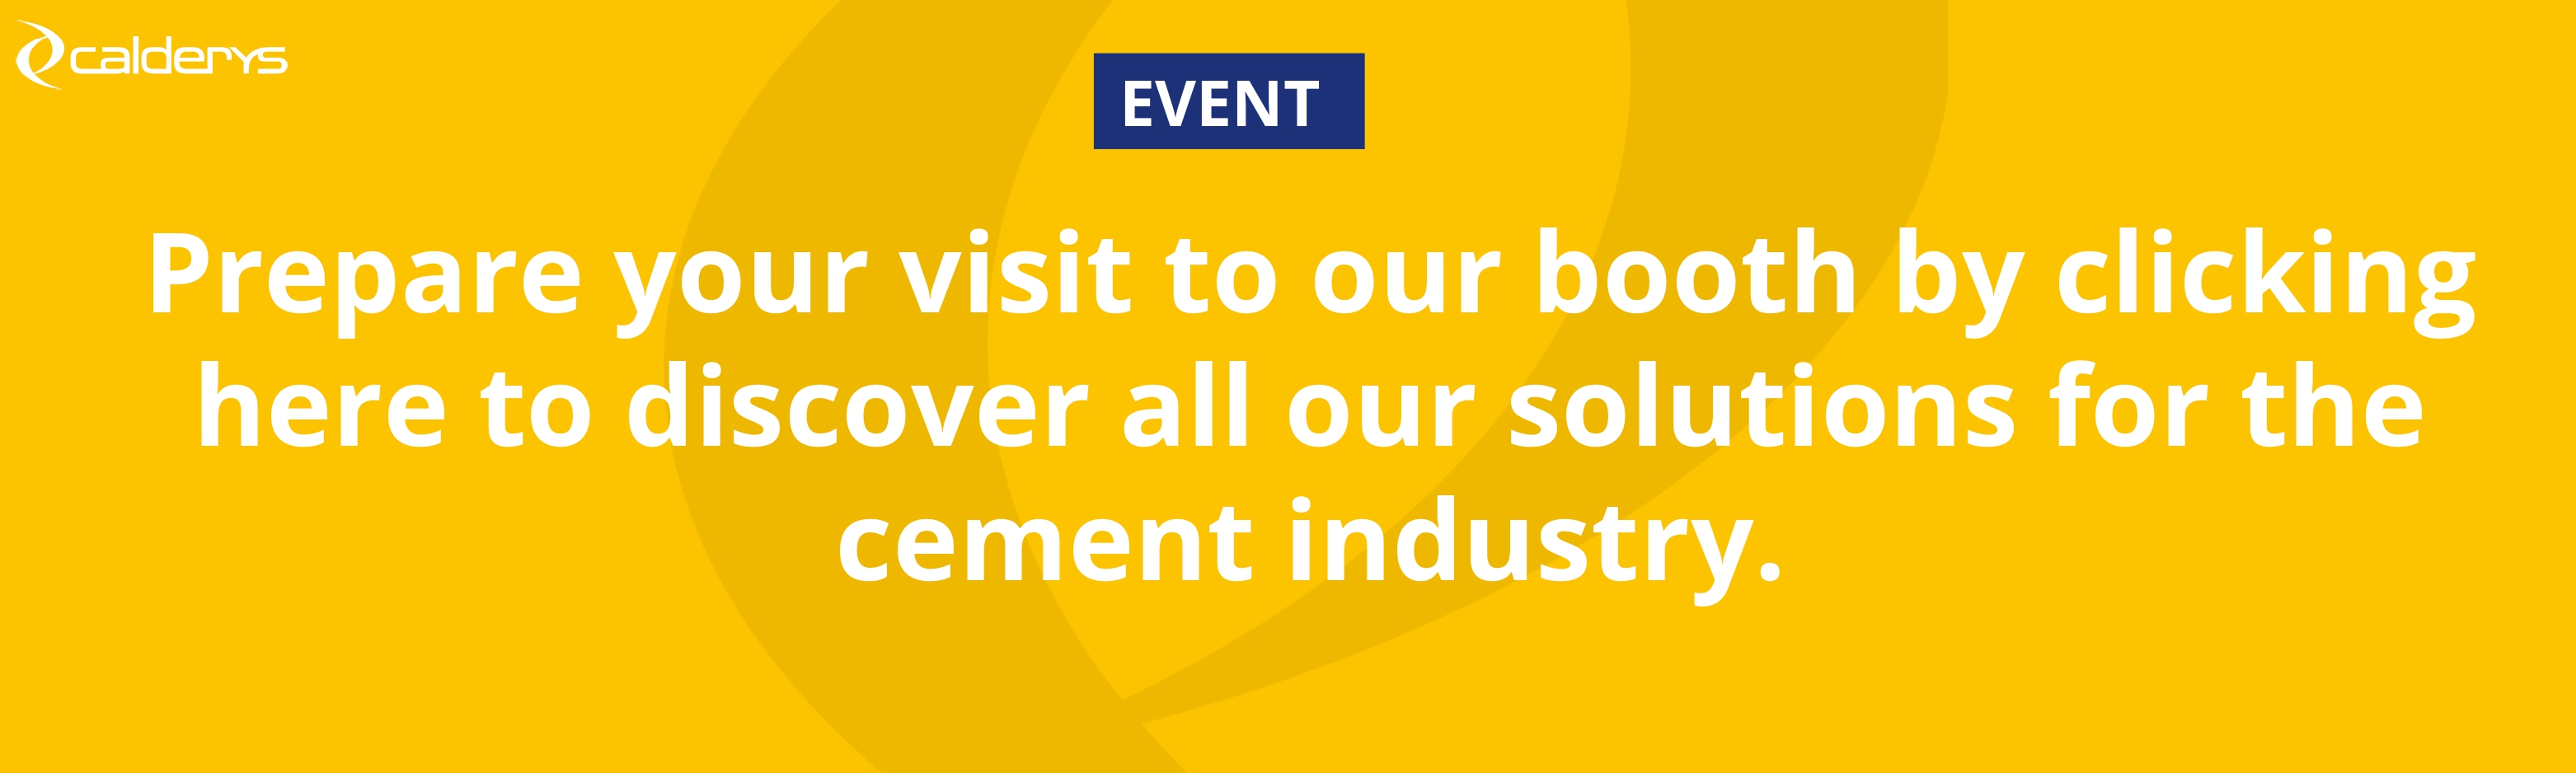 Prepare your visit to our booth by clicking here to discover all our solutions for the cement industry.